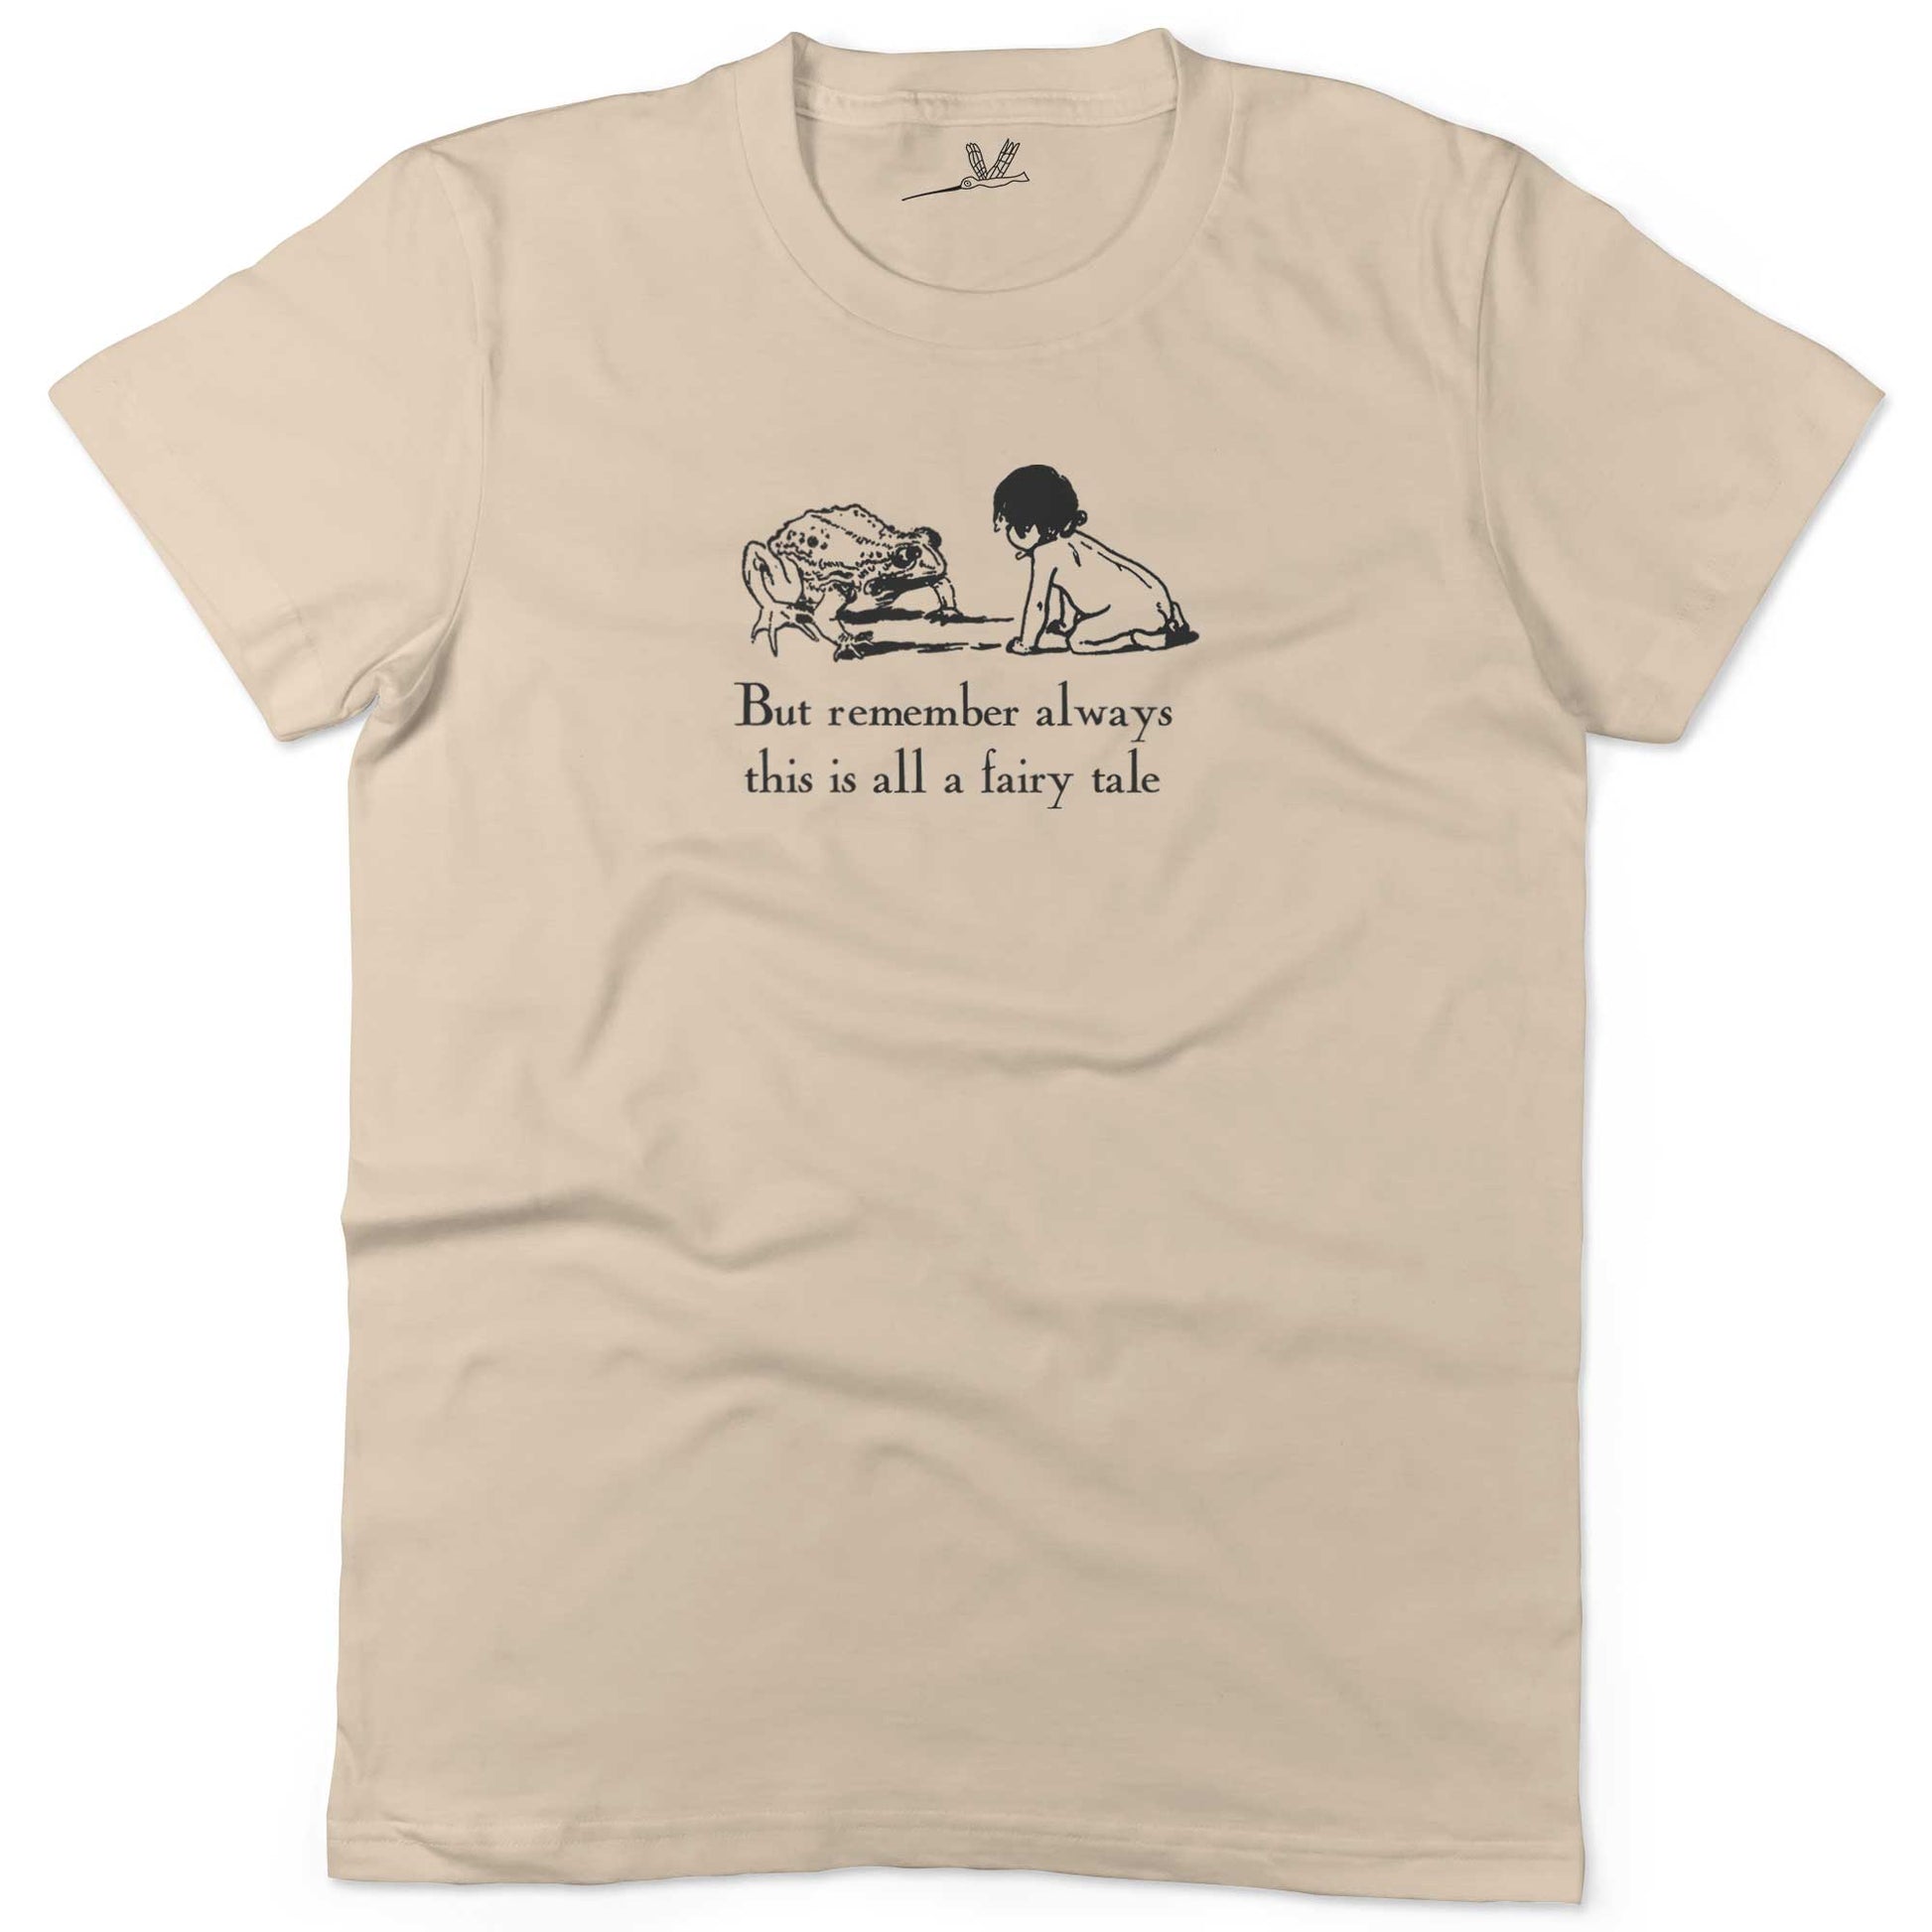 But remember always this is all a fairy tale Unisex Or Women's Cotton T-shirt-Organic Natural-Woman